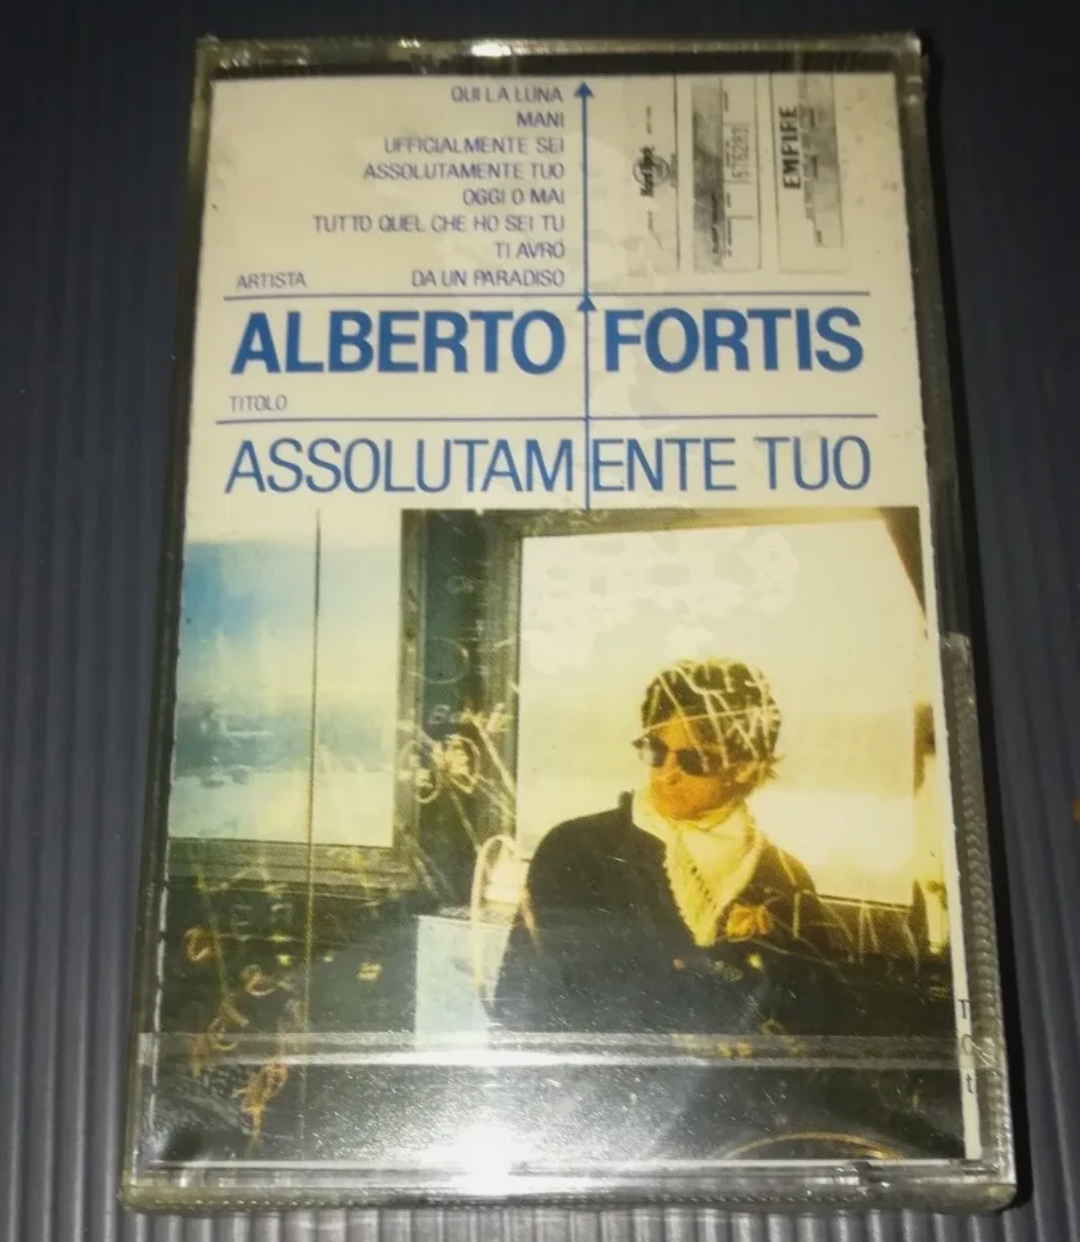 Absolutely Yours" Alberto Fortis Musicassetta